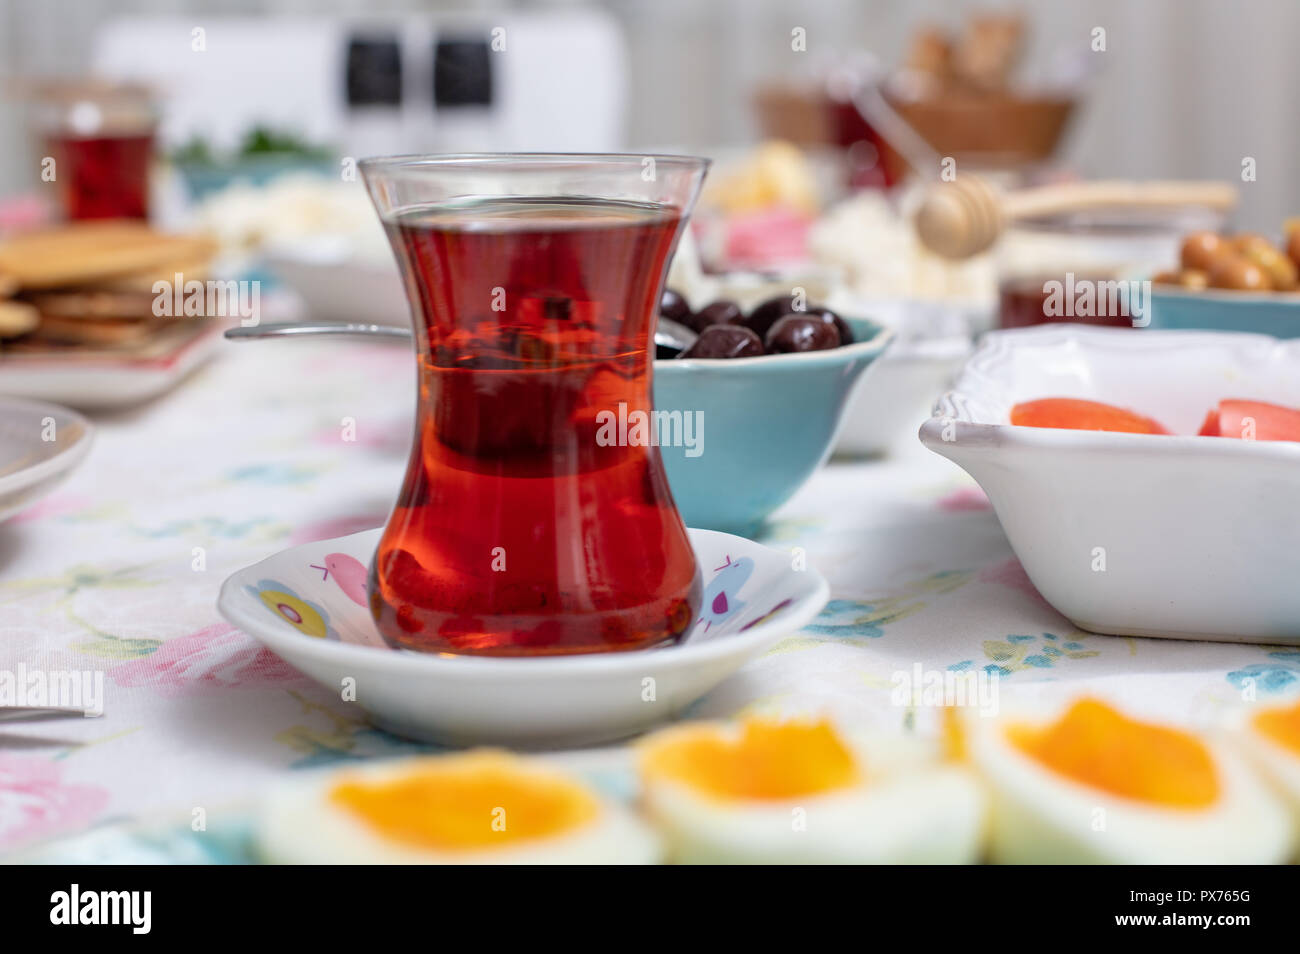 Turkish breakfast with simit (bagel) pancake, cheese, cherry tomato, cucumber, and tea on a table close up view, selective focus Stock Photo